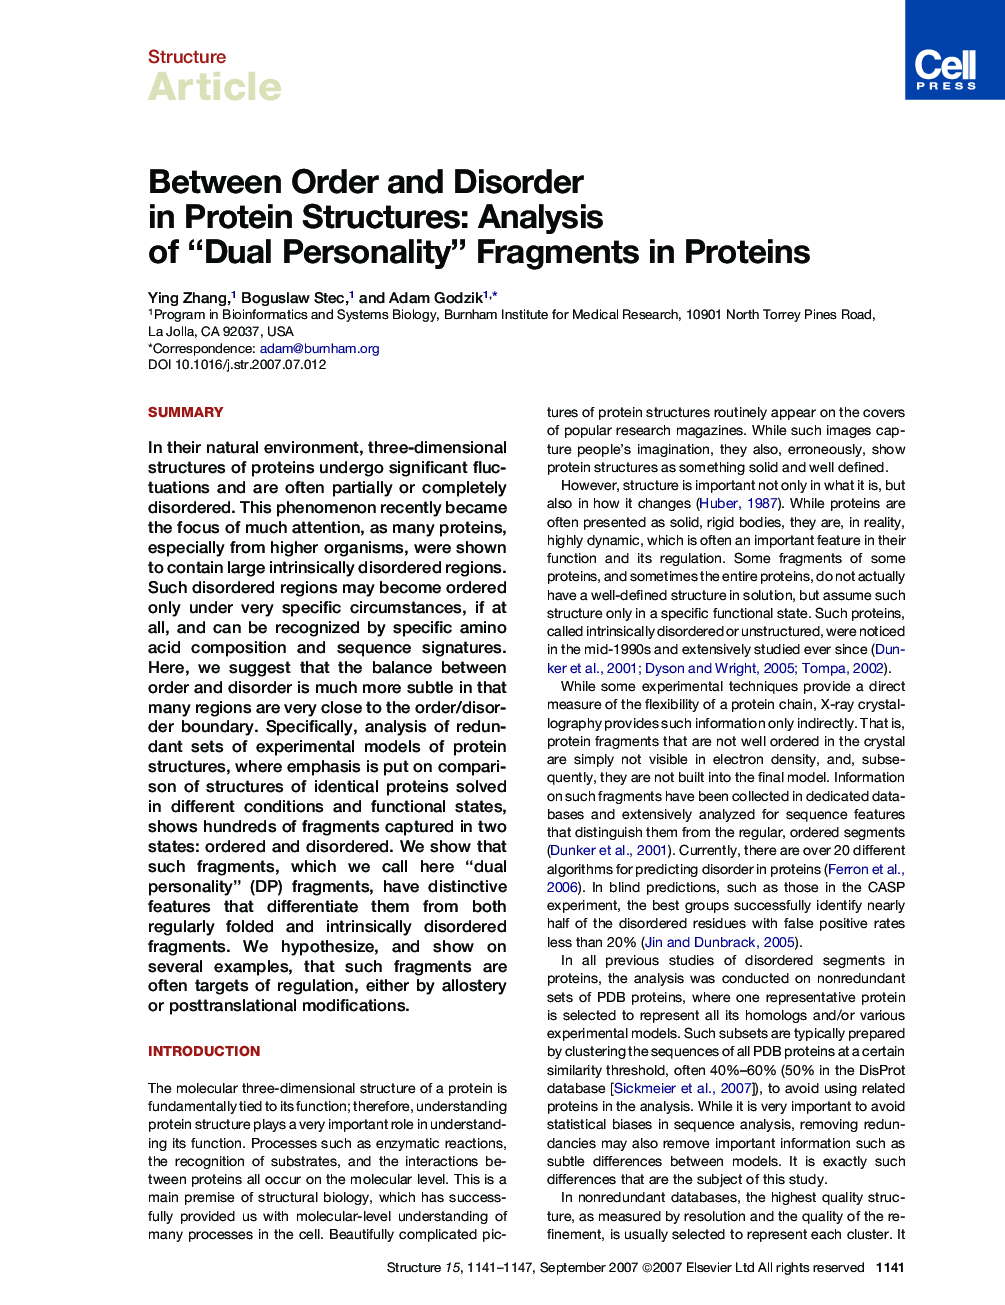 Between Order and Disorder in Protein Structures: Analysis of “Dual Personality” Fragments in Proteins